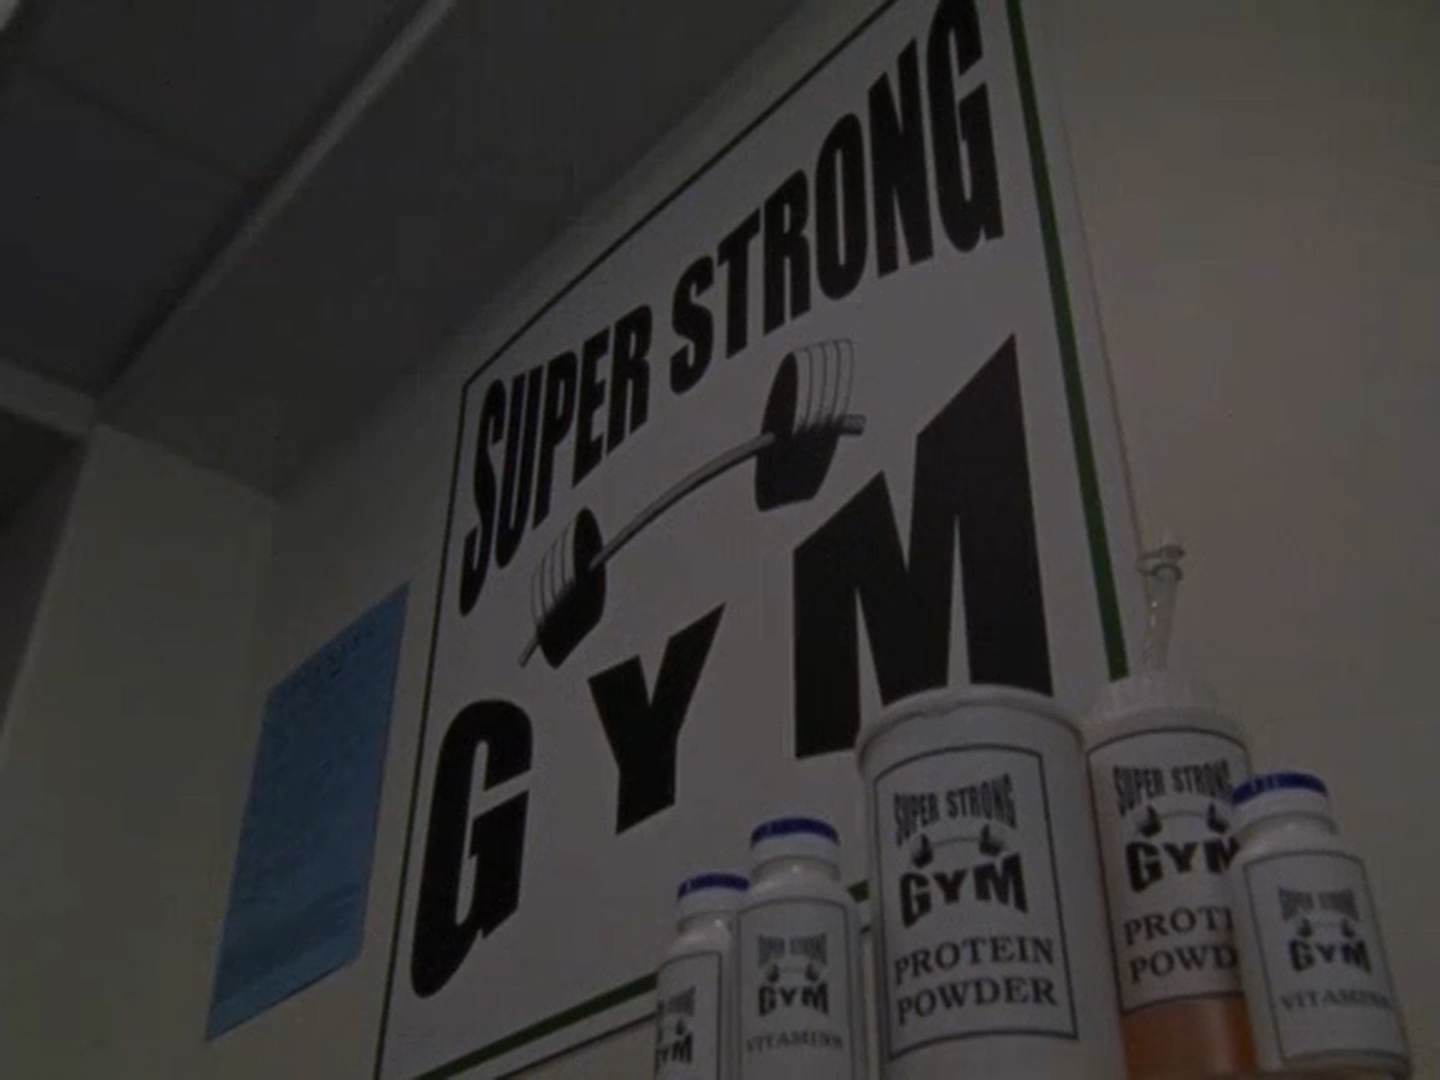 Super Strong Gym